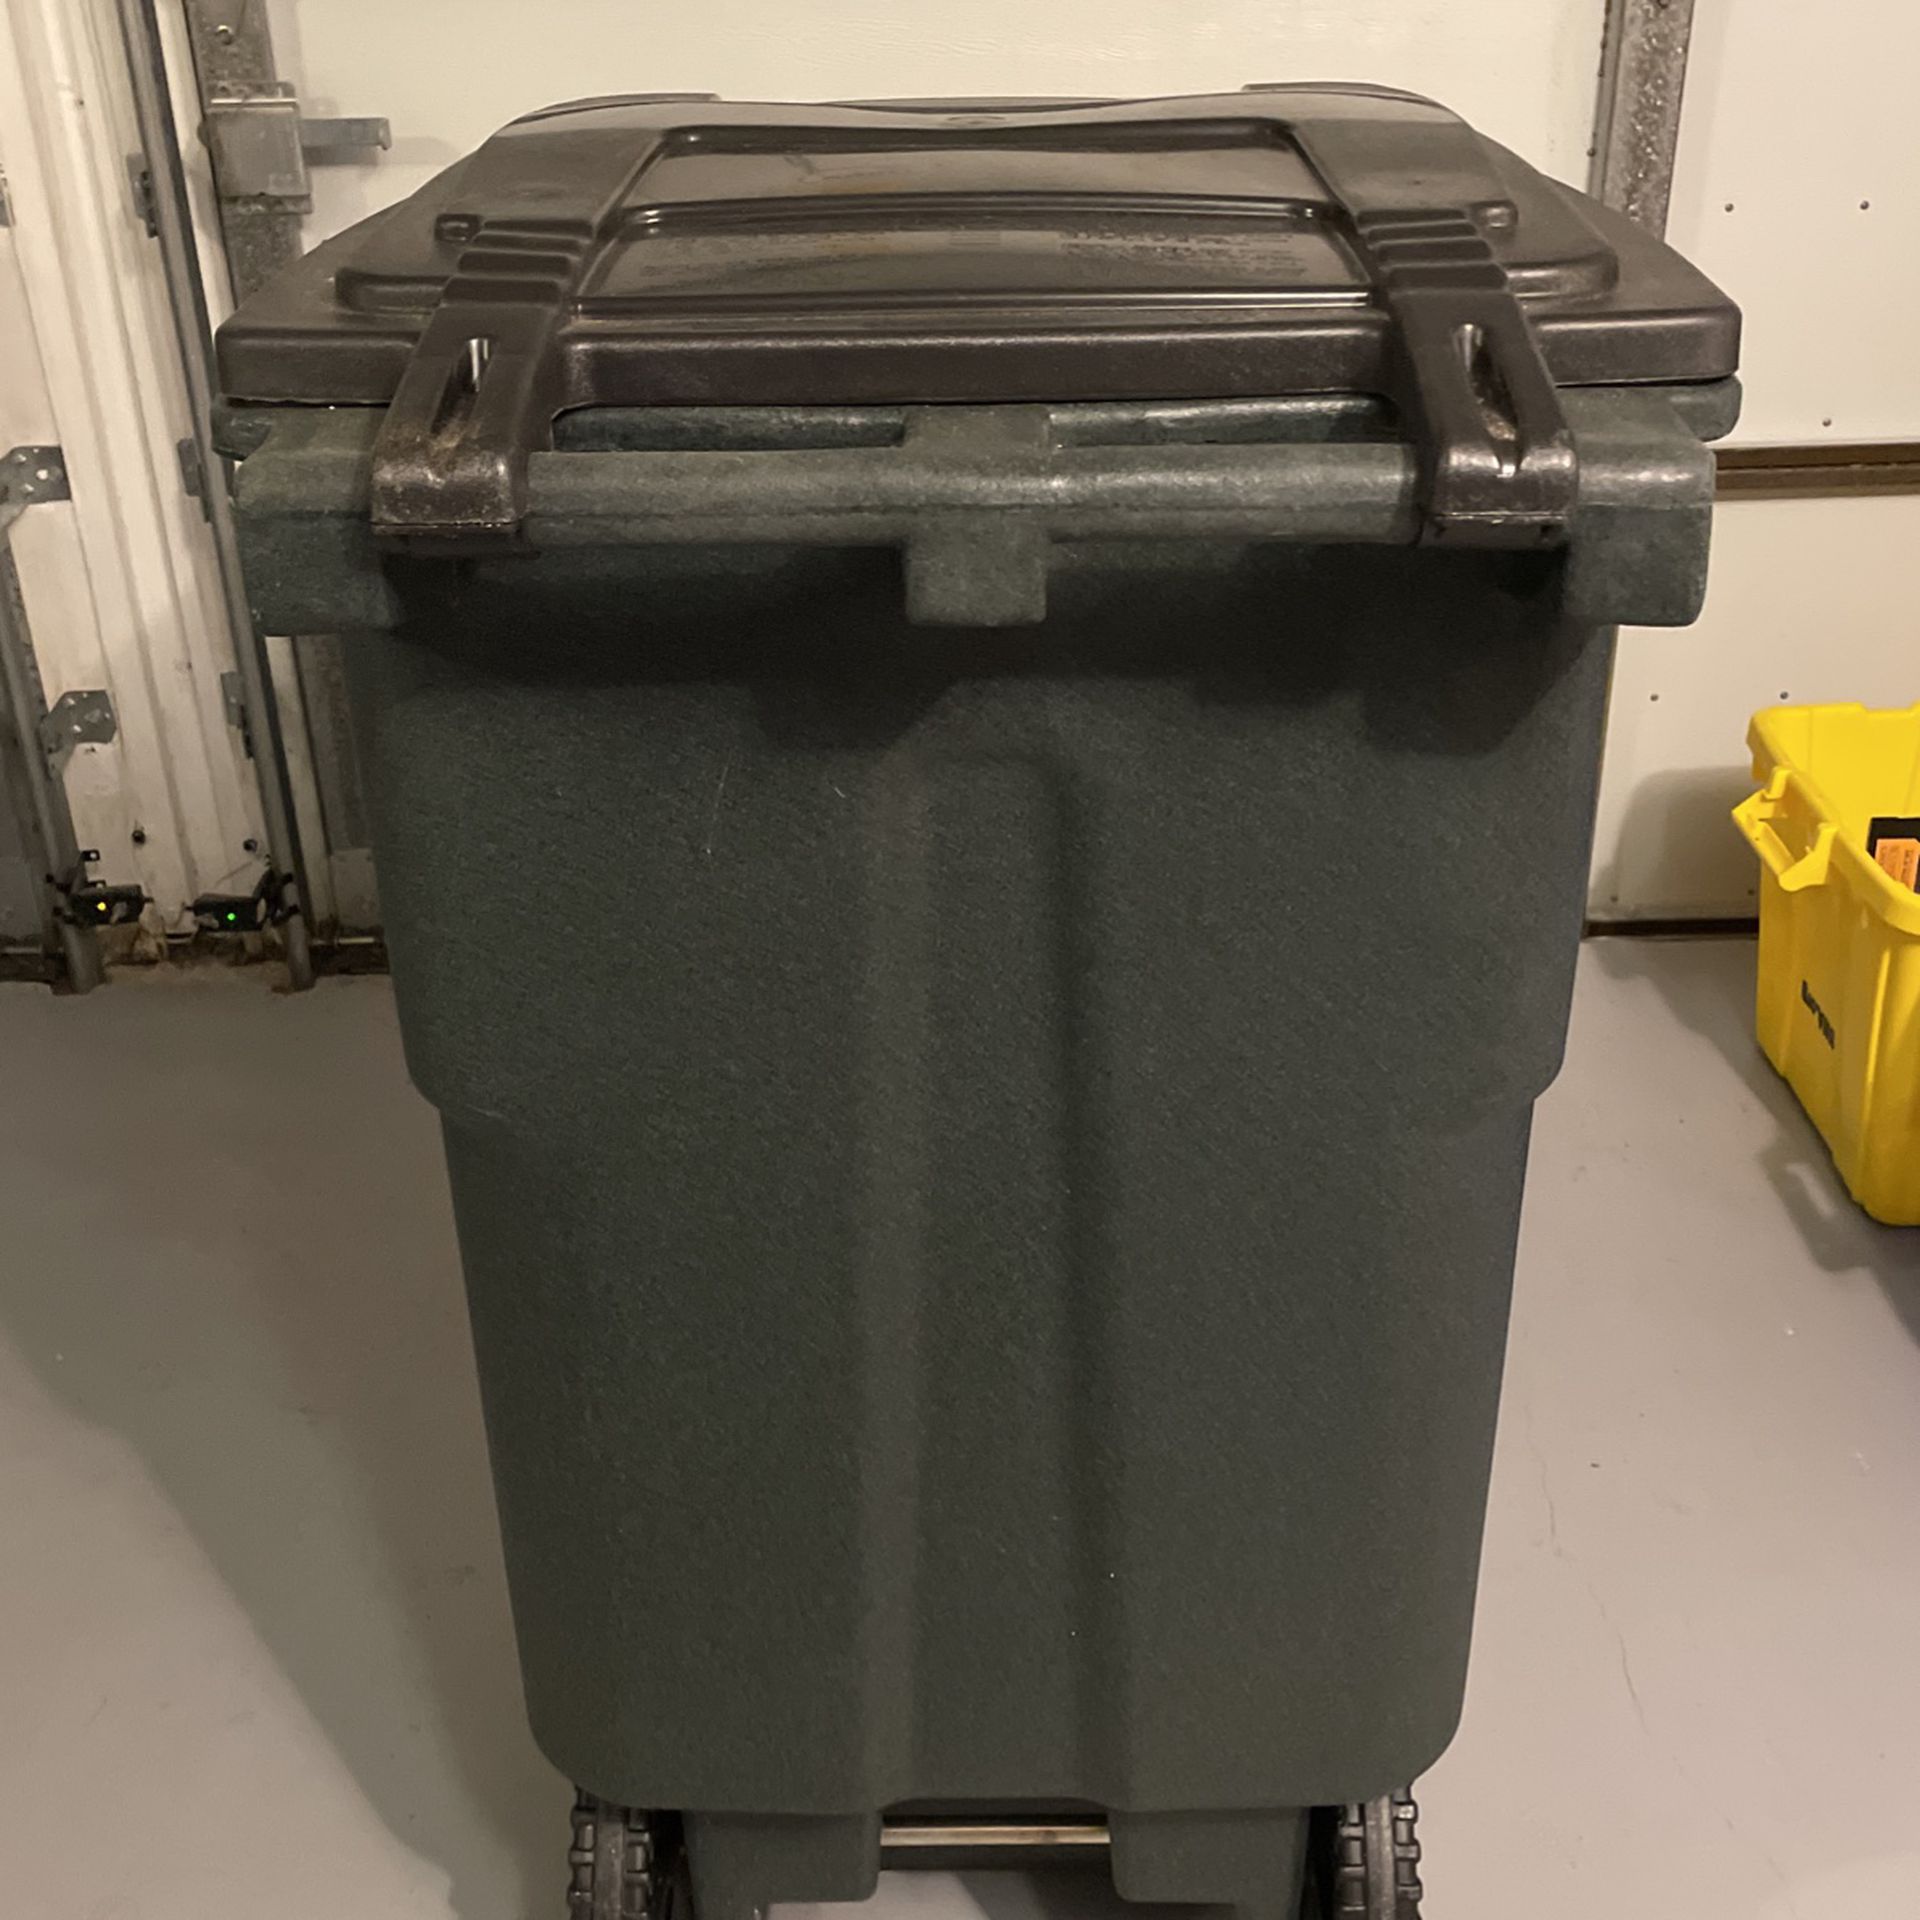 STERILITE Swing Lid Garbage Can, Black Lid & Base, 13.2 gallon /50L for  Sale in Prospect Heights, IL - OfferUp